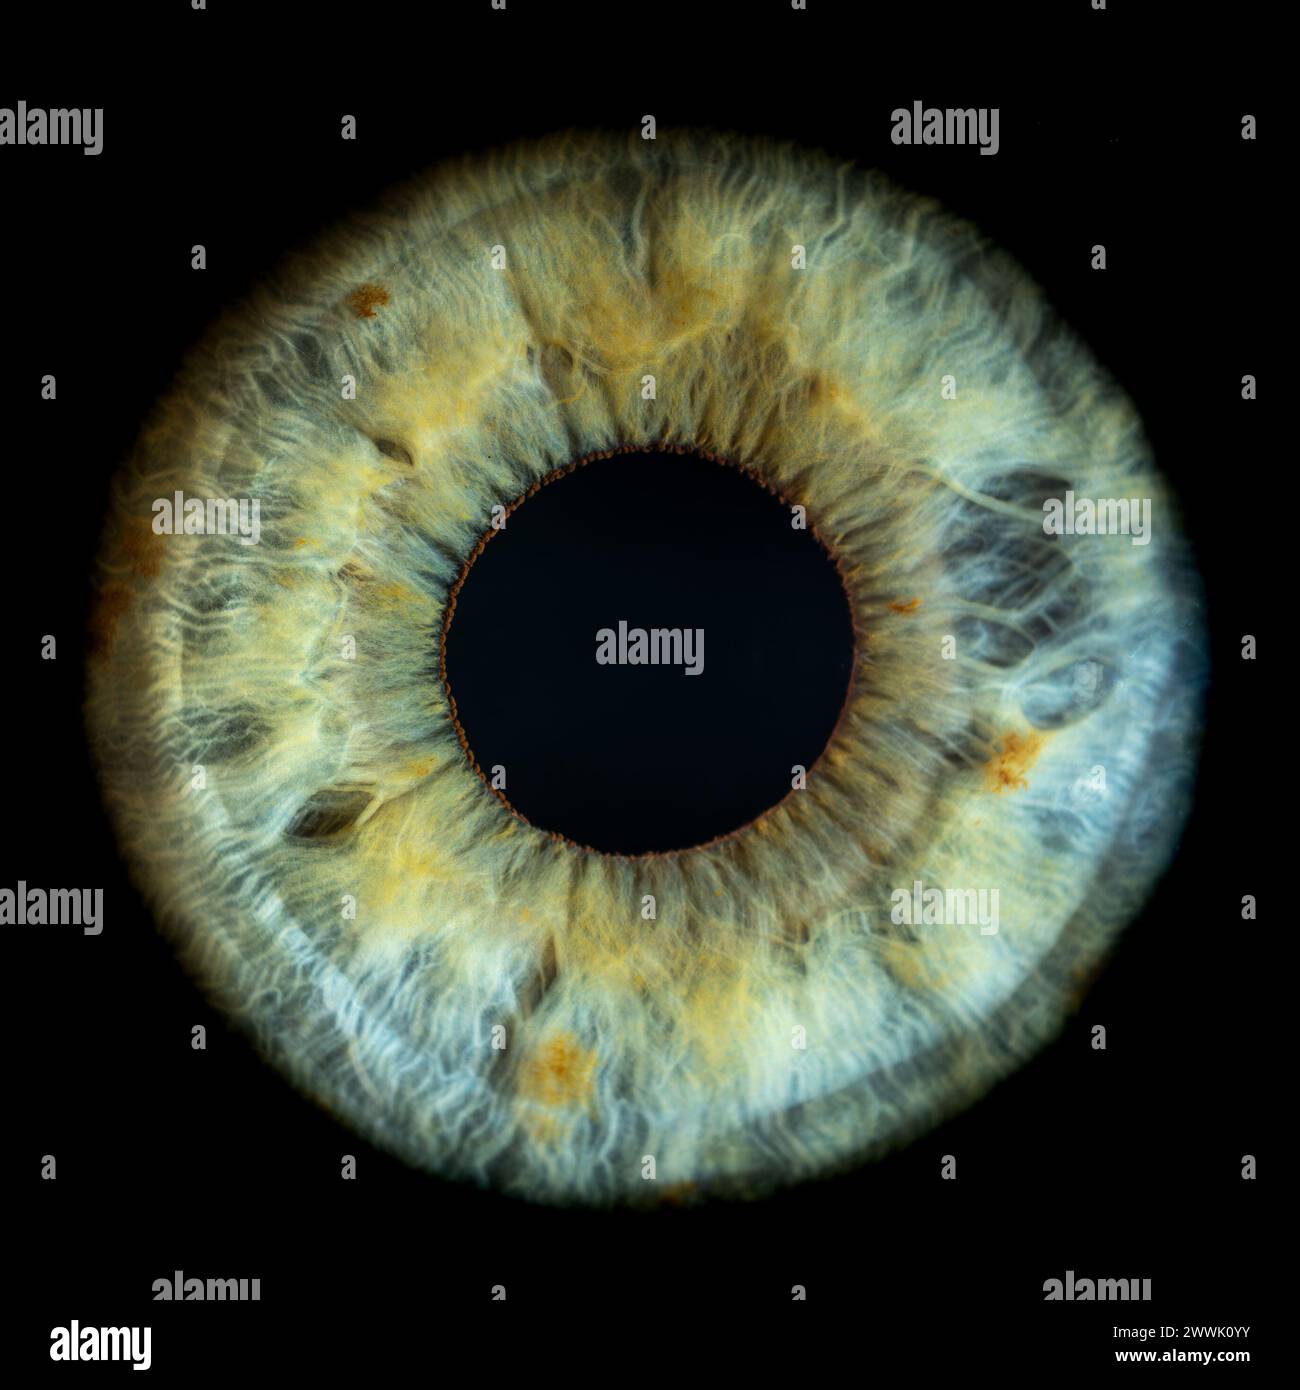 Description: Macro photo of human eye on black background. Close-up of female blue-green colored eye with yellow spots. Structural Anatomy. Iris Detai Stock Photo